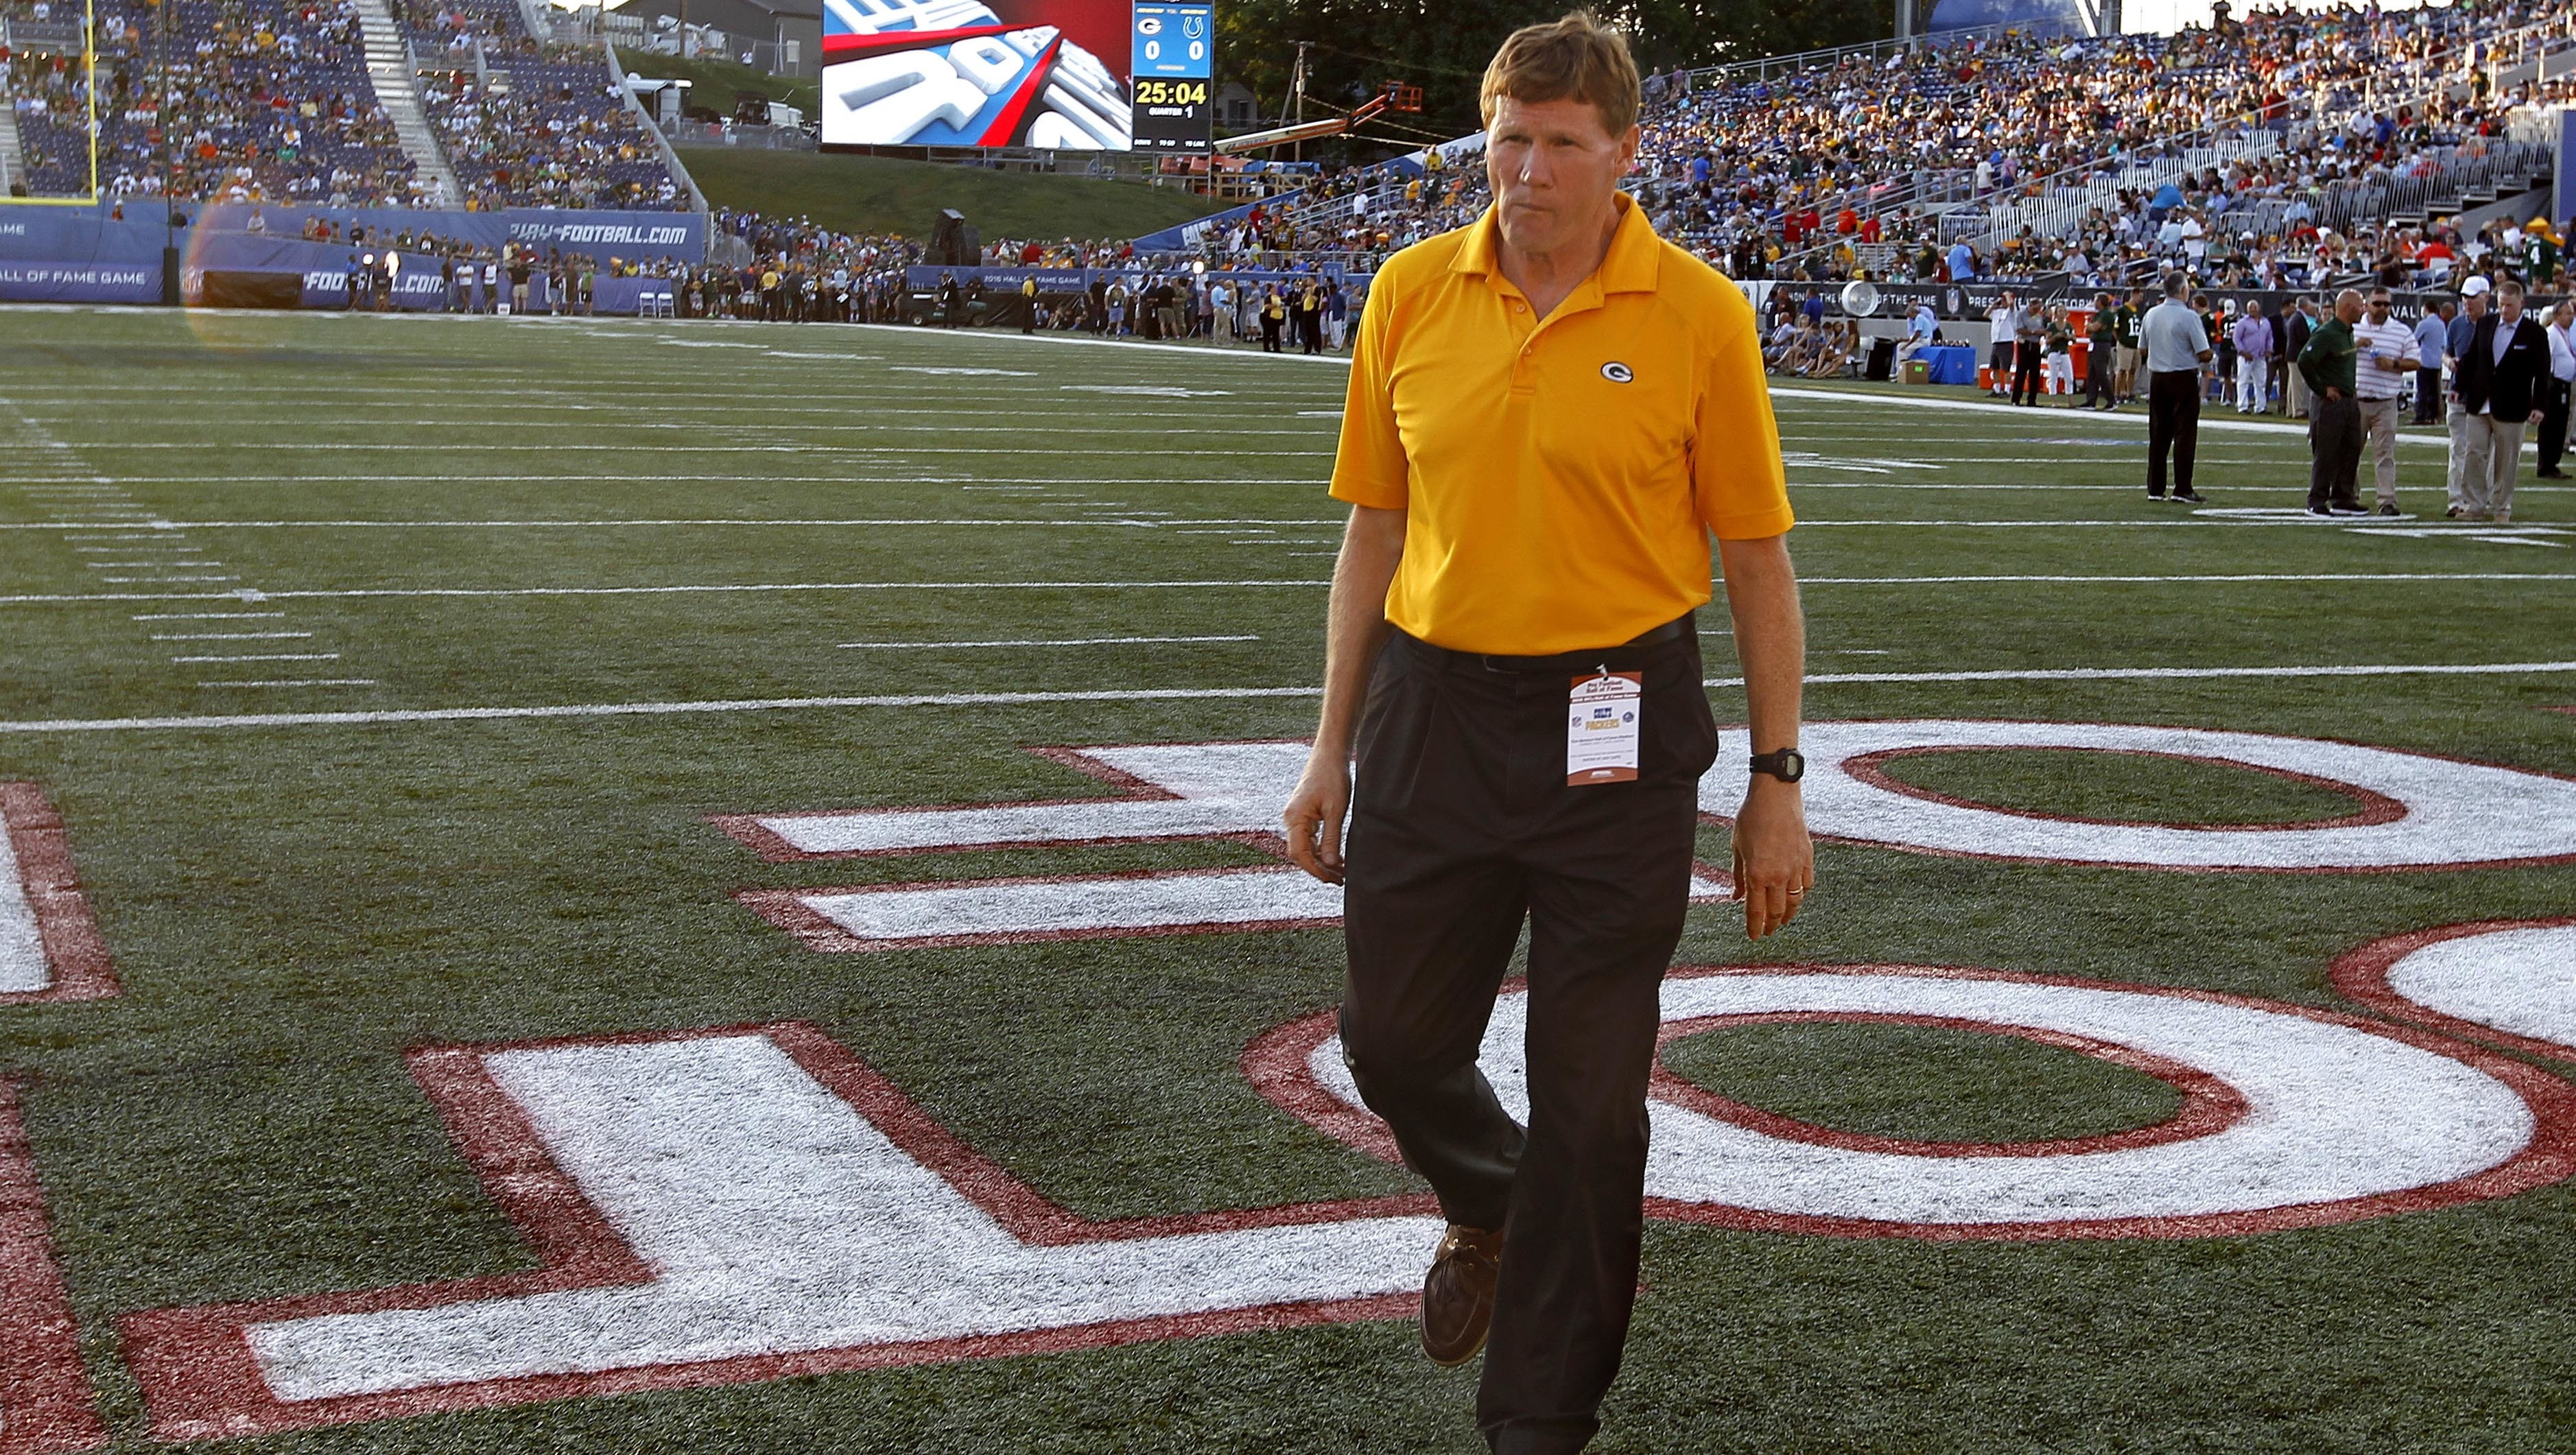 Green Bay Packers President Mark Murphy walks off the field after the NFL preseason game between the Green Bay Packers and Indianapolis Colts was cancelled. Poor field conditions